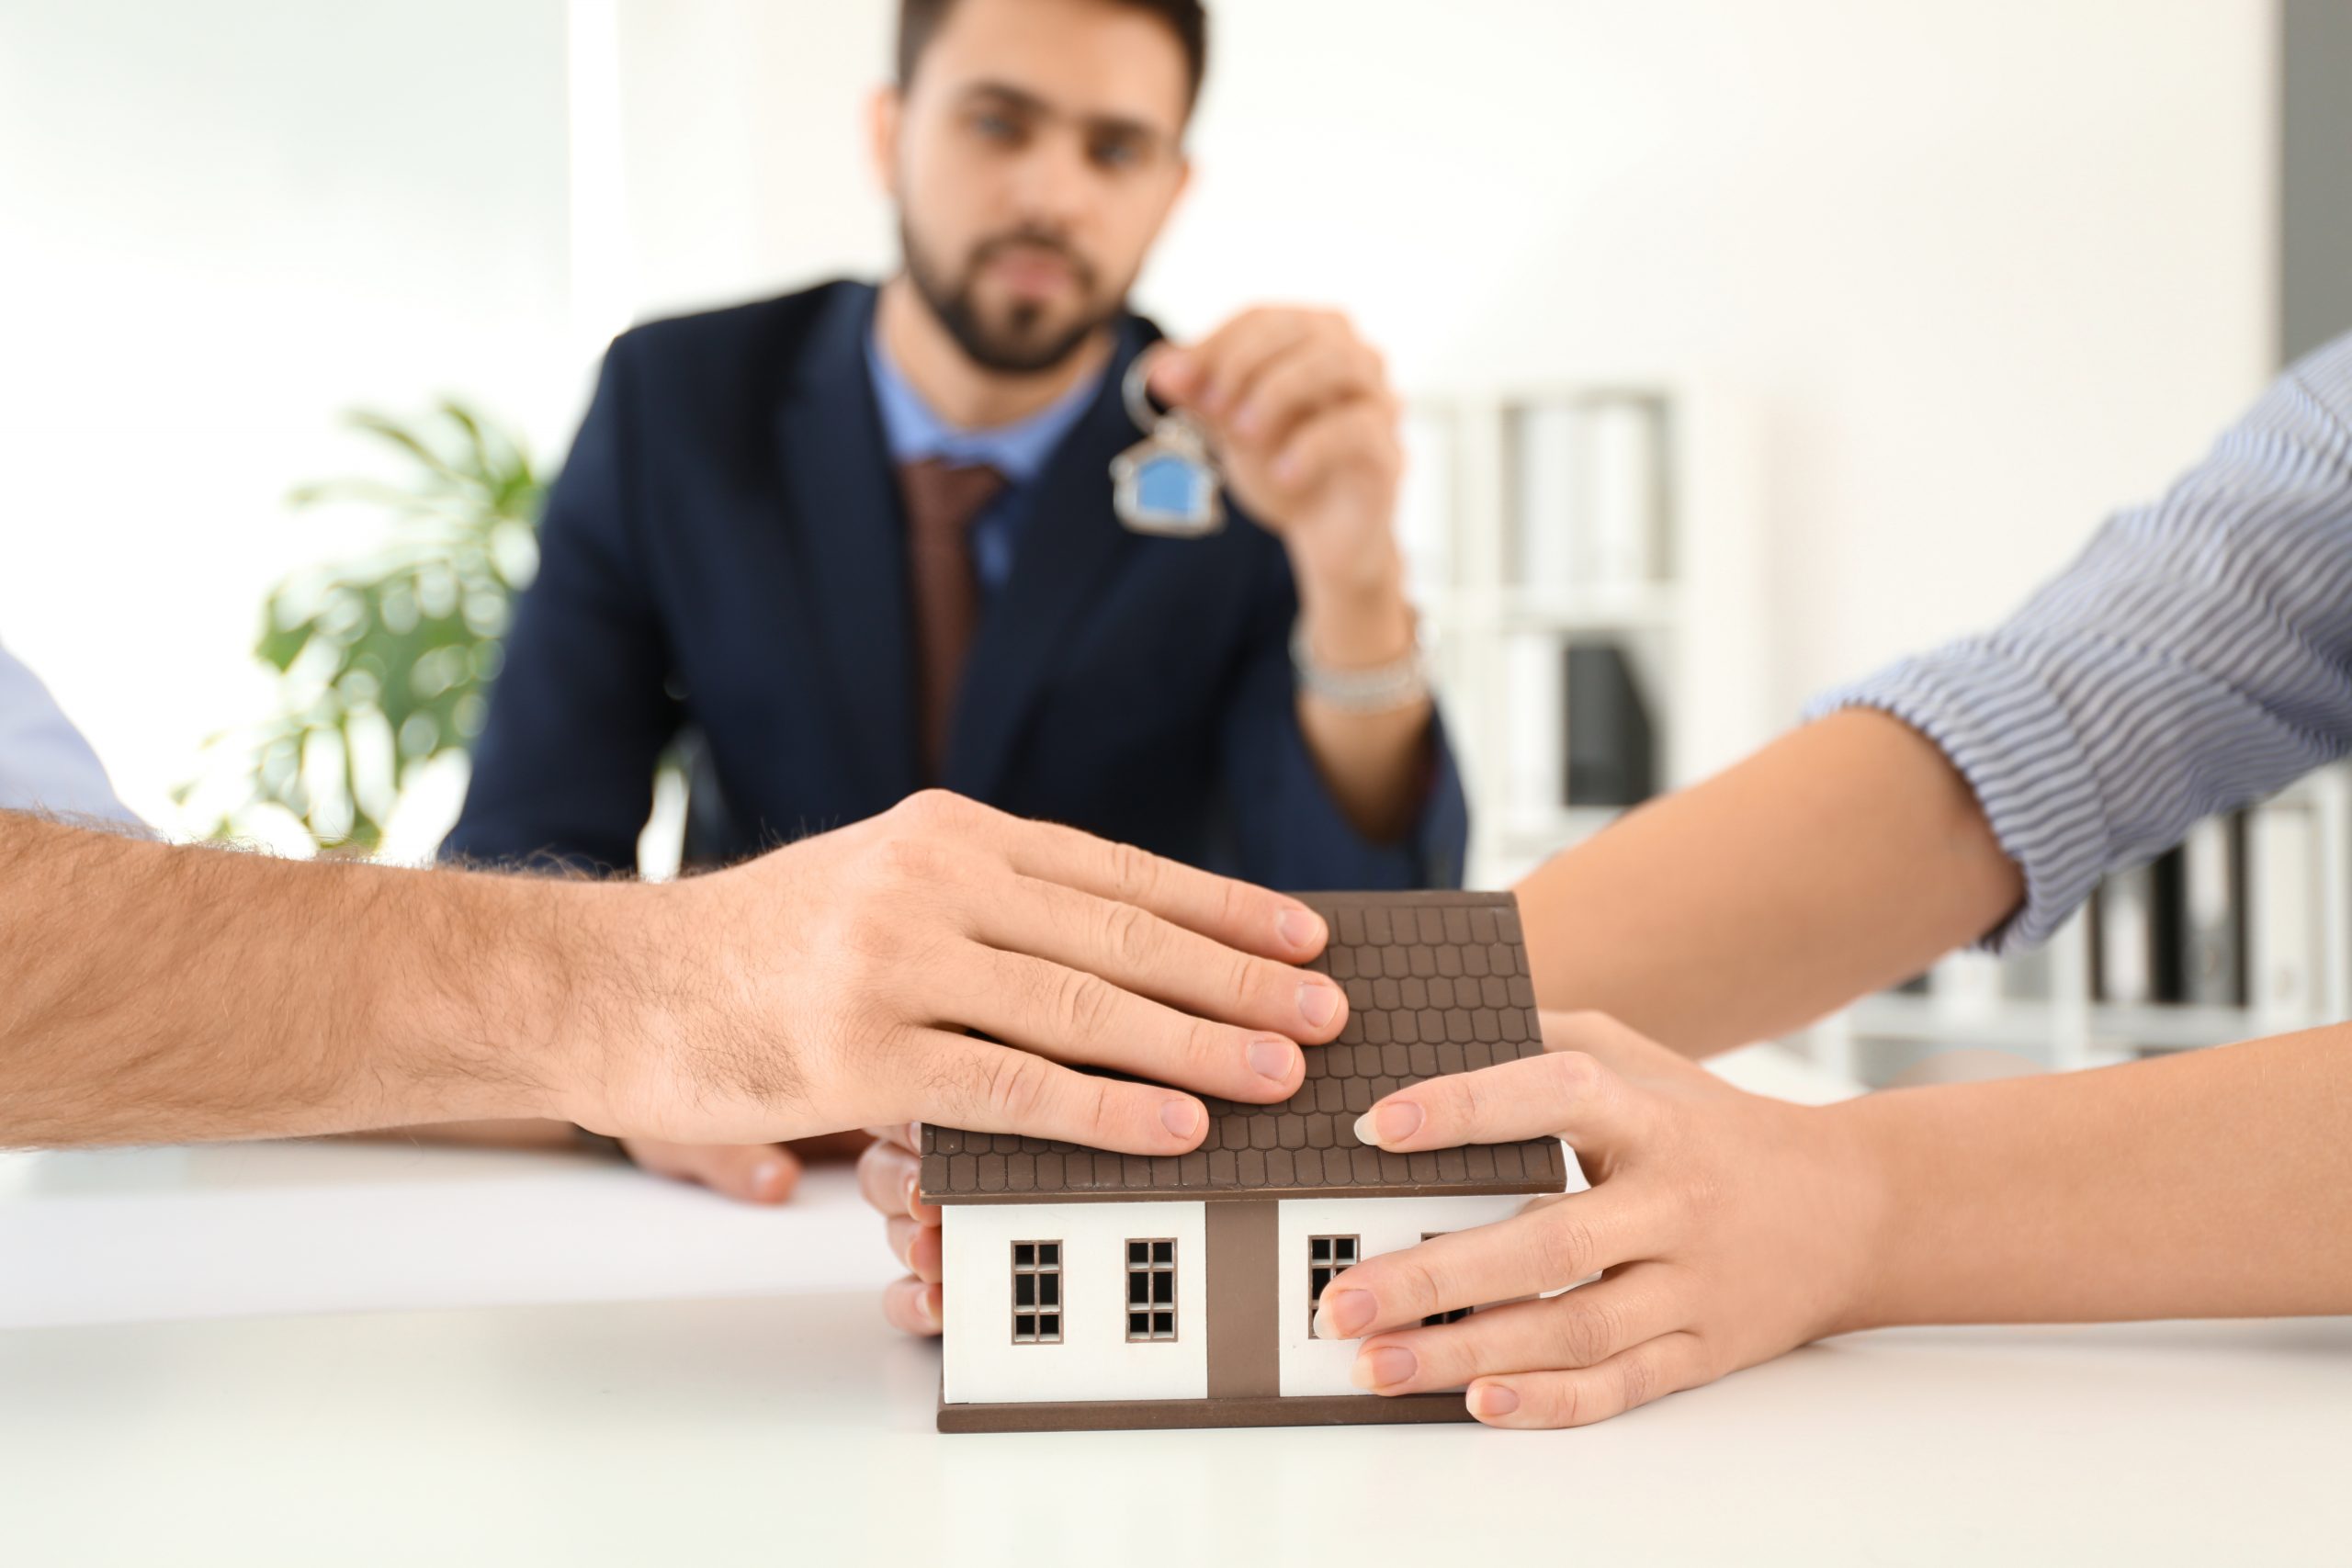 Can I Force The Sale Of My House In a Divorce?